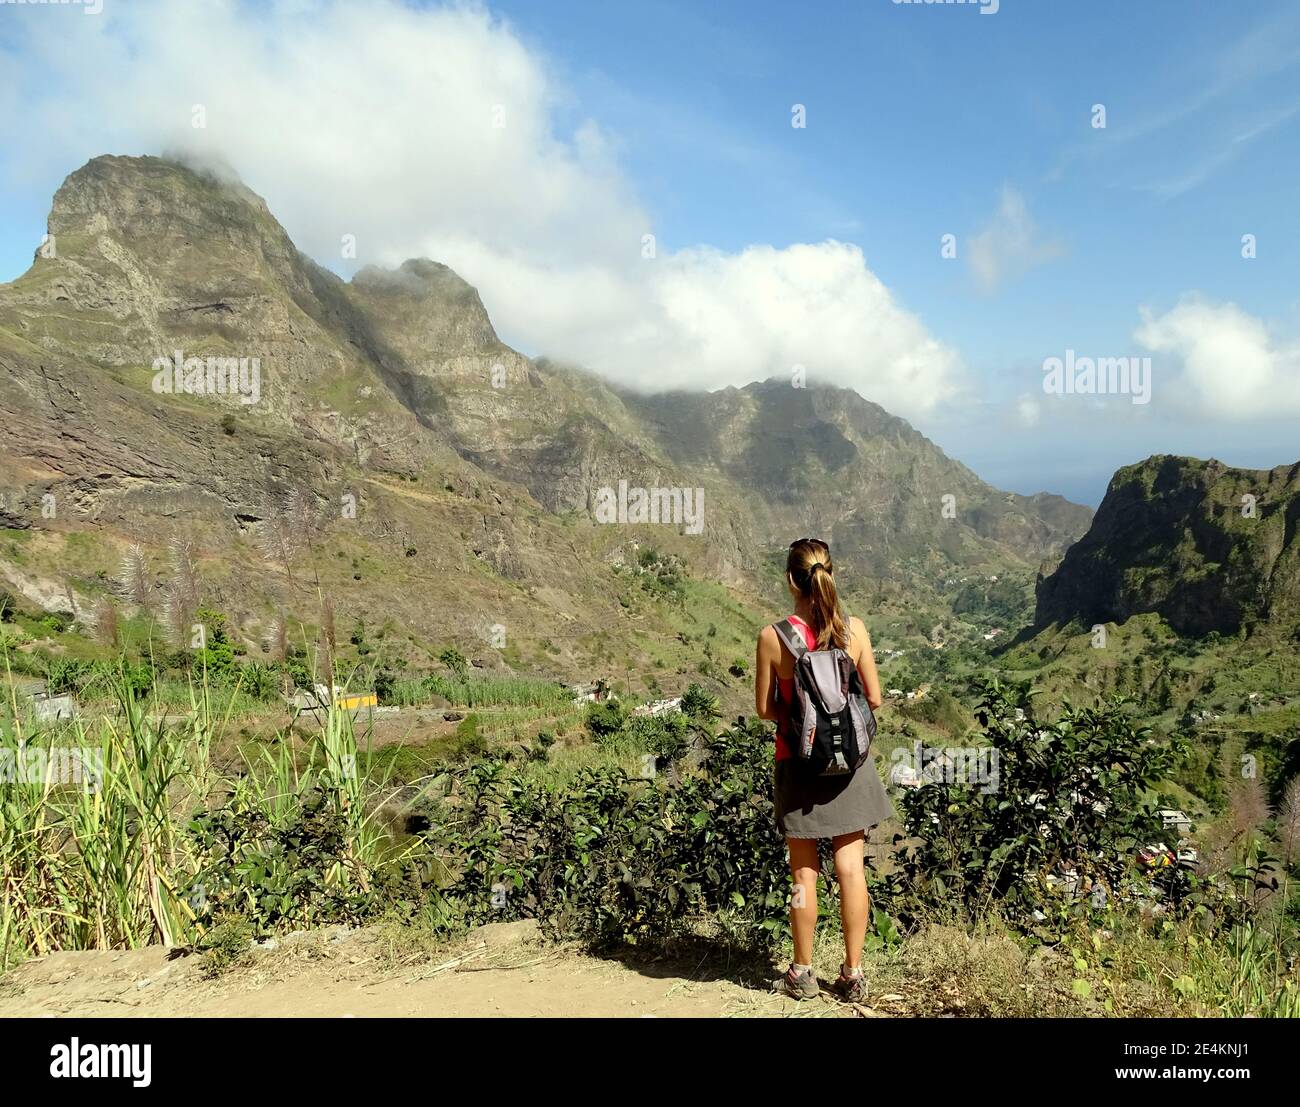 Cape Verde, Santo Antao island, woman during walking tour with great landscape in background, solo. Stock Photo